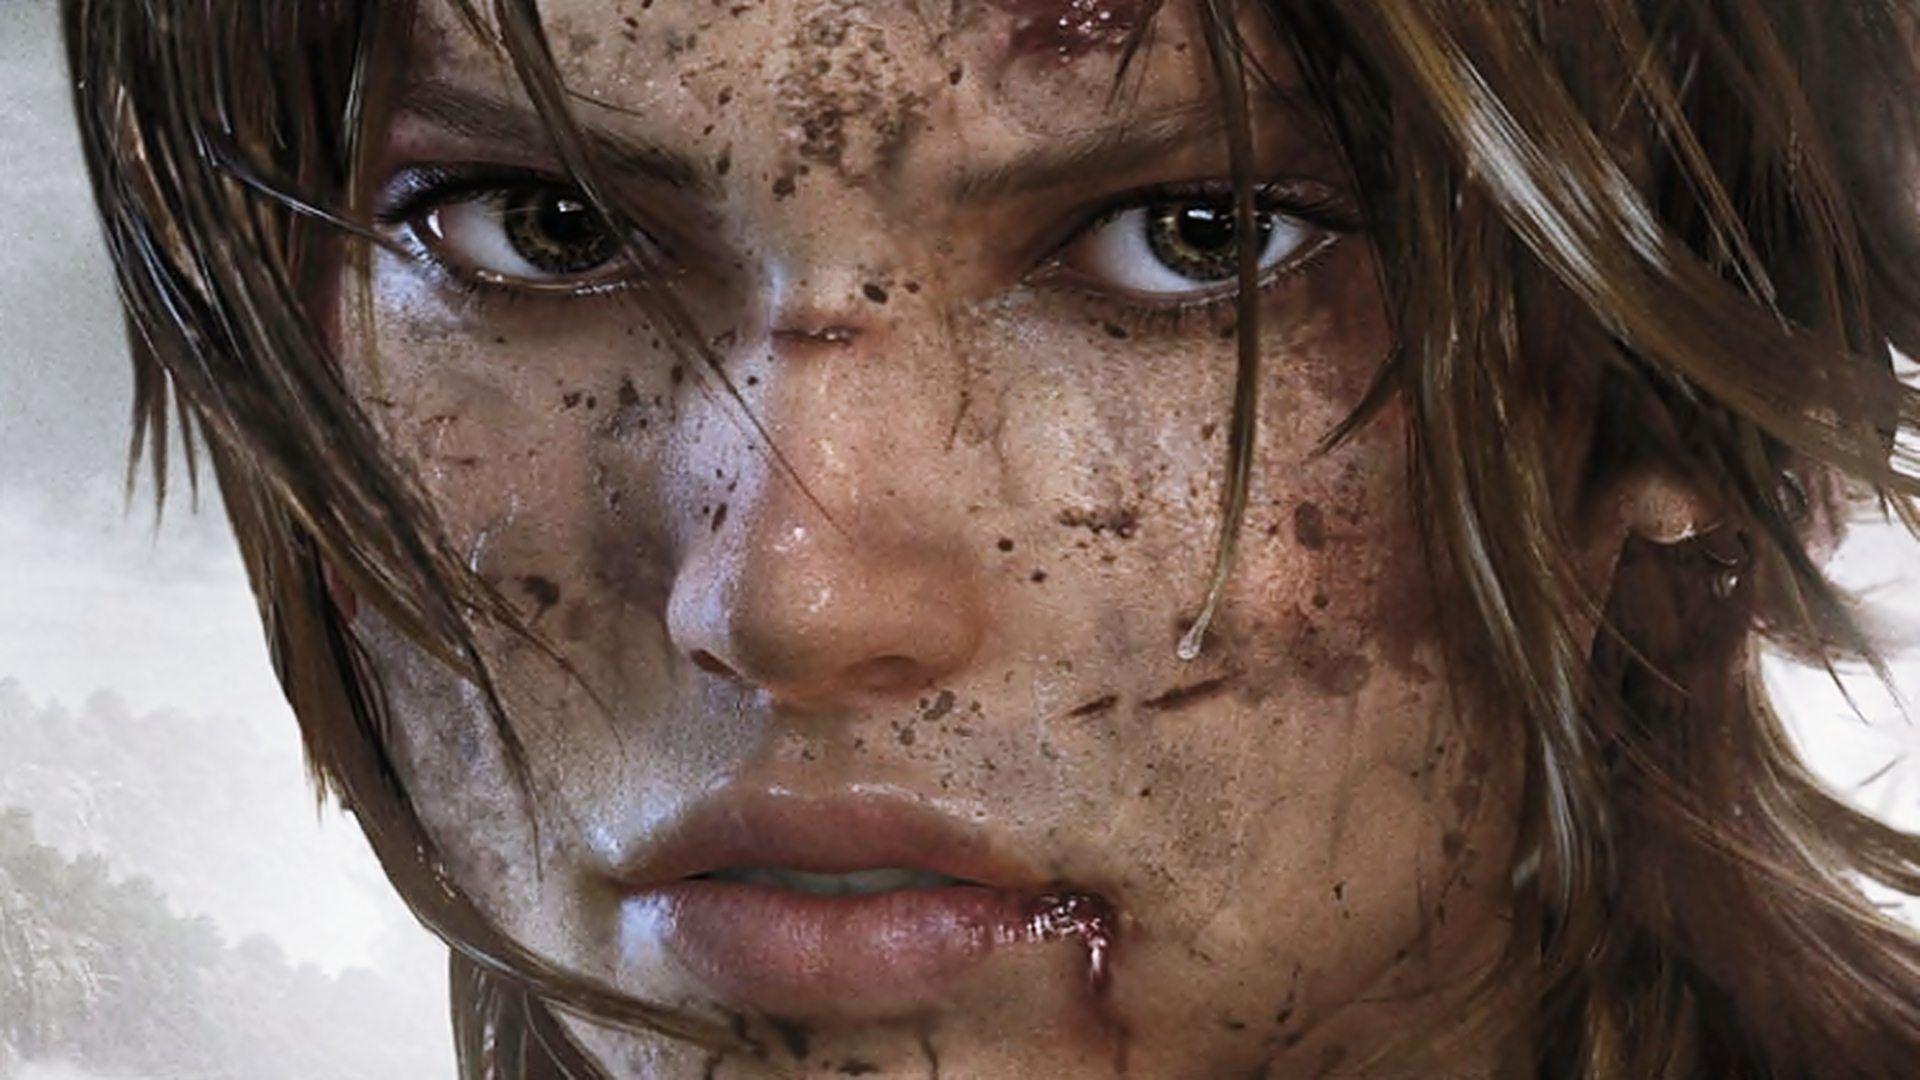 Rise Of The Tomb Raider Sells Over 1 Million Copies Alongside Halo